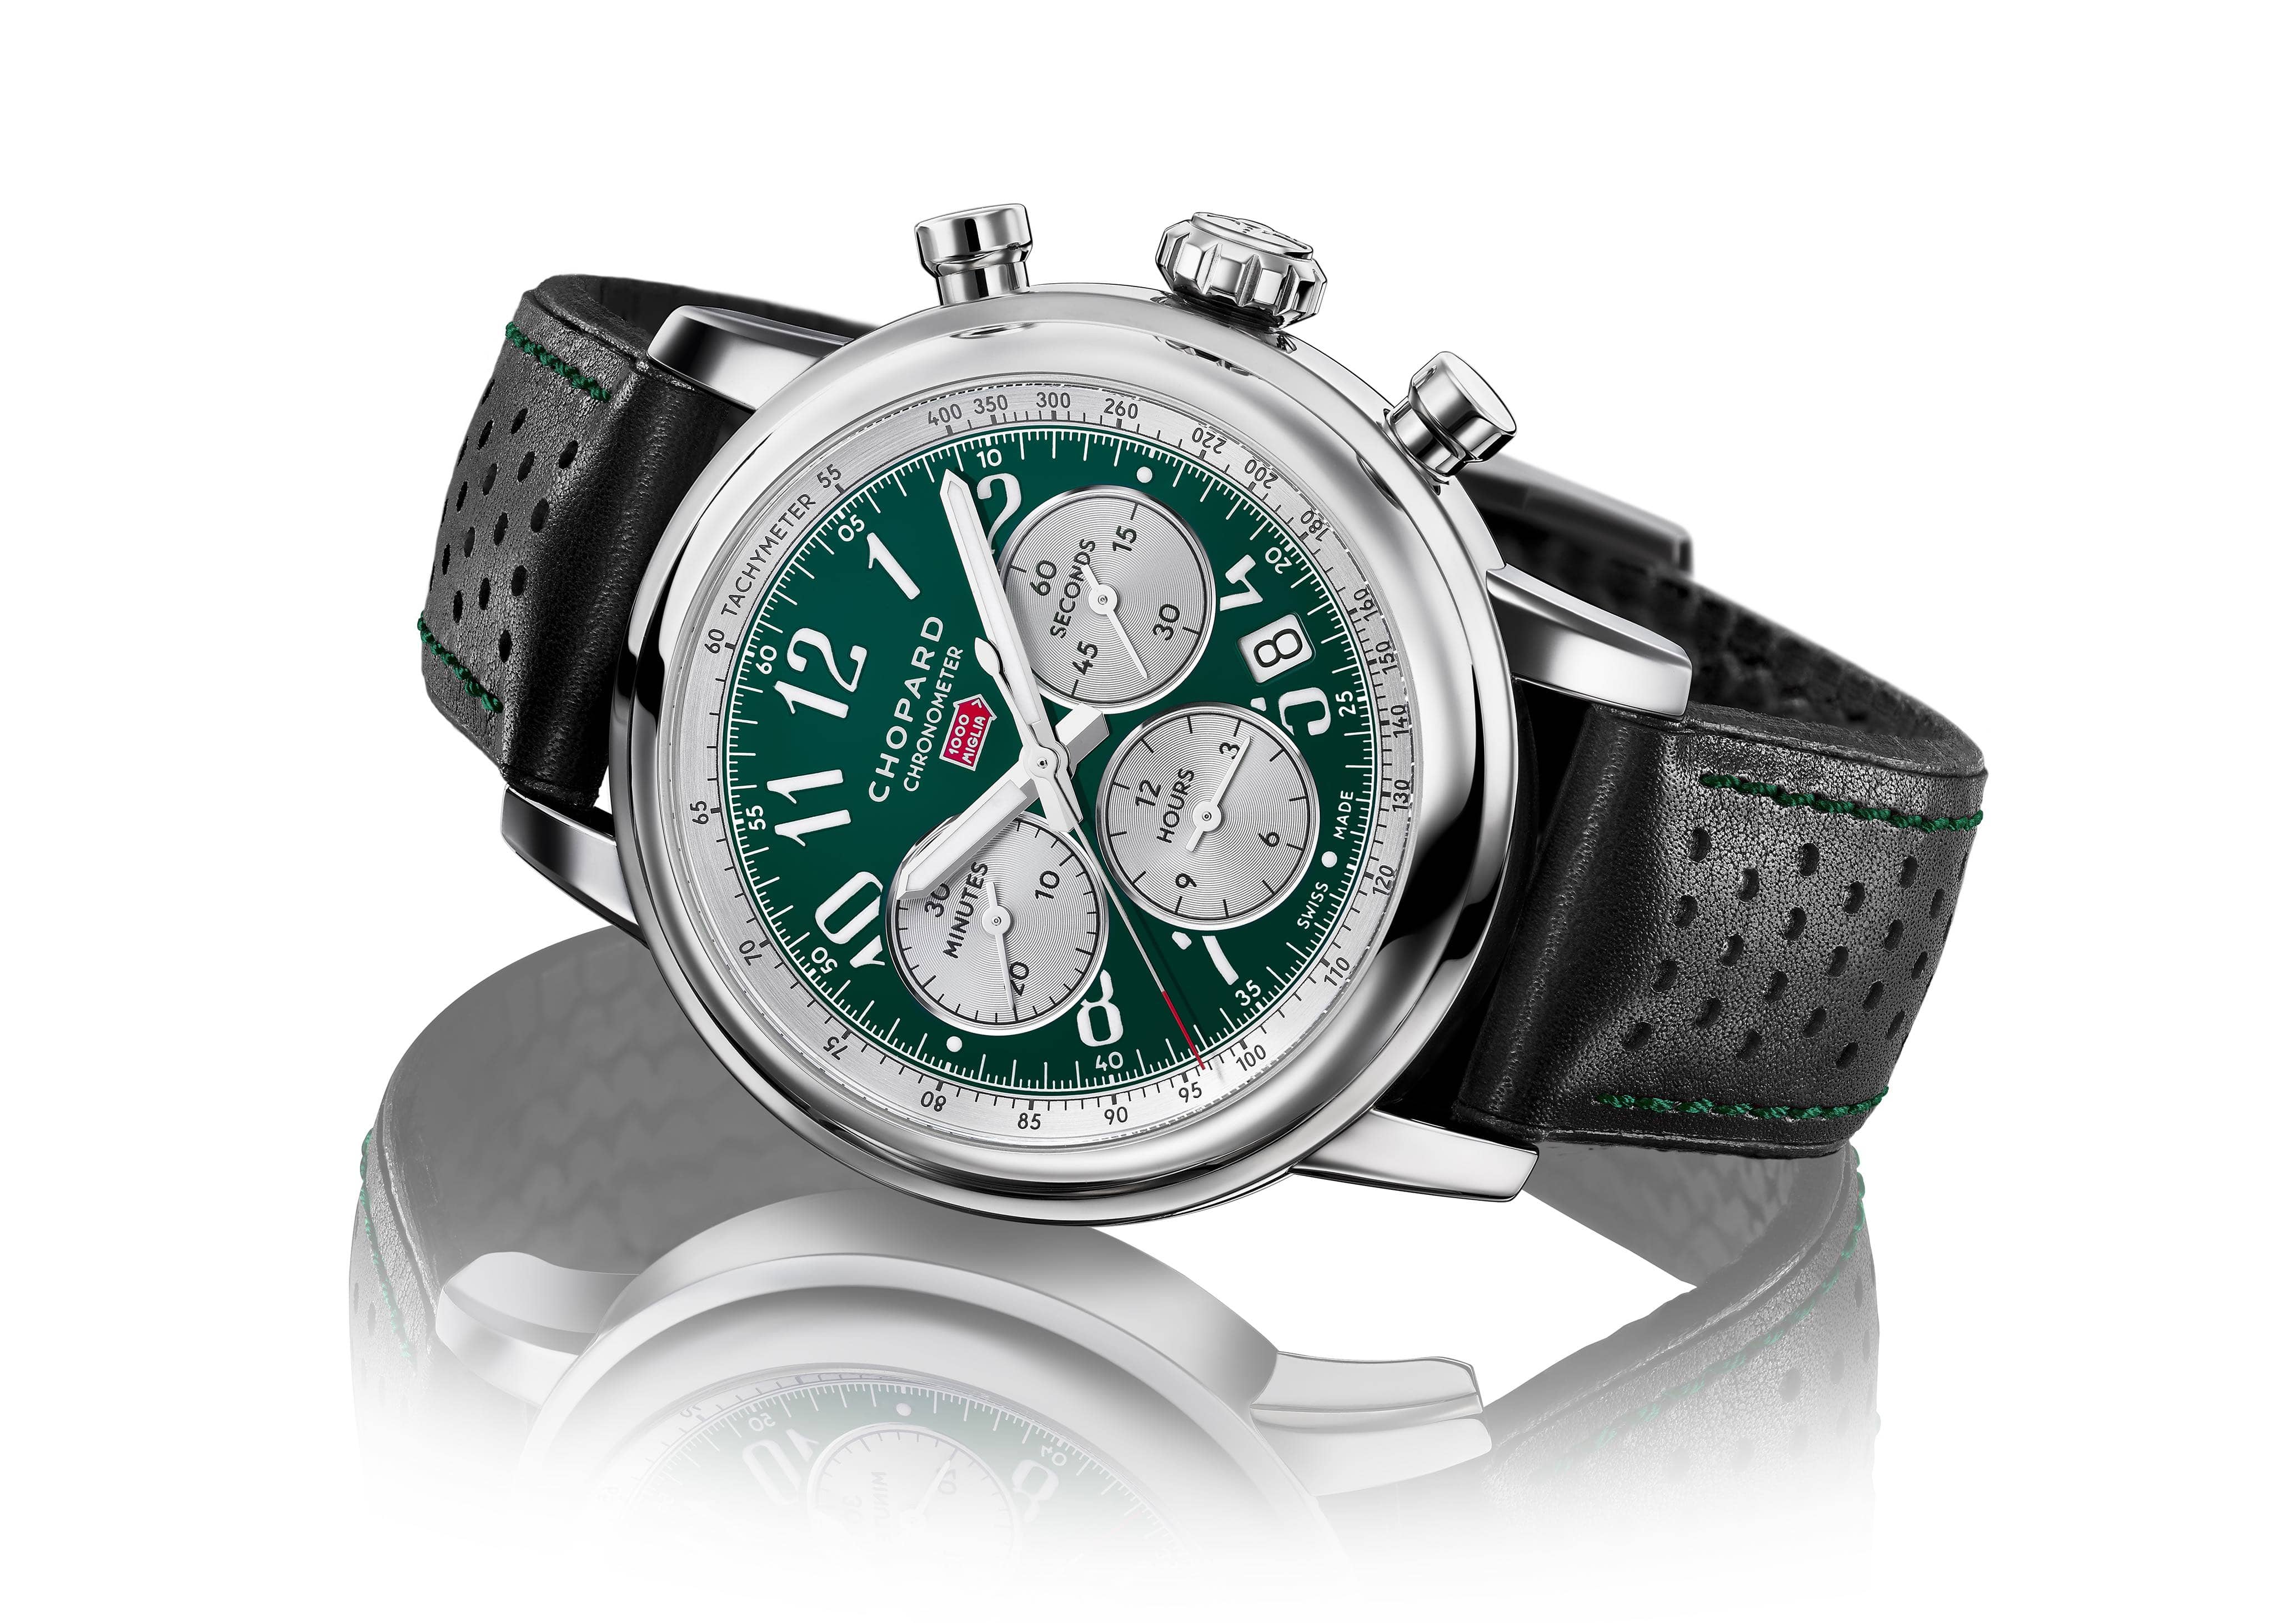 Mille Miglia Racing Colours in British Racing Green